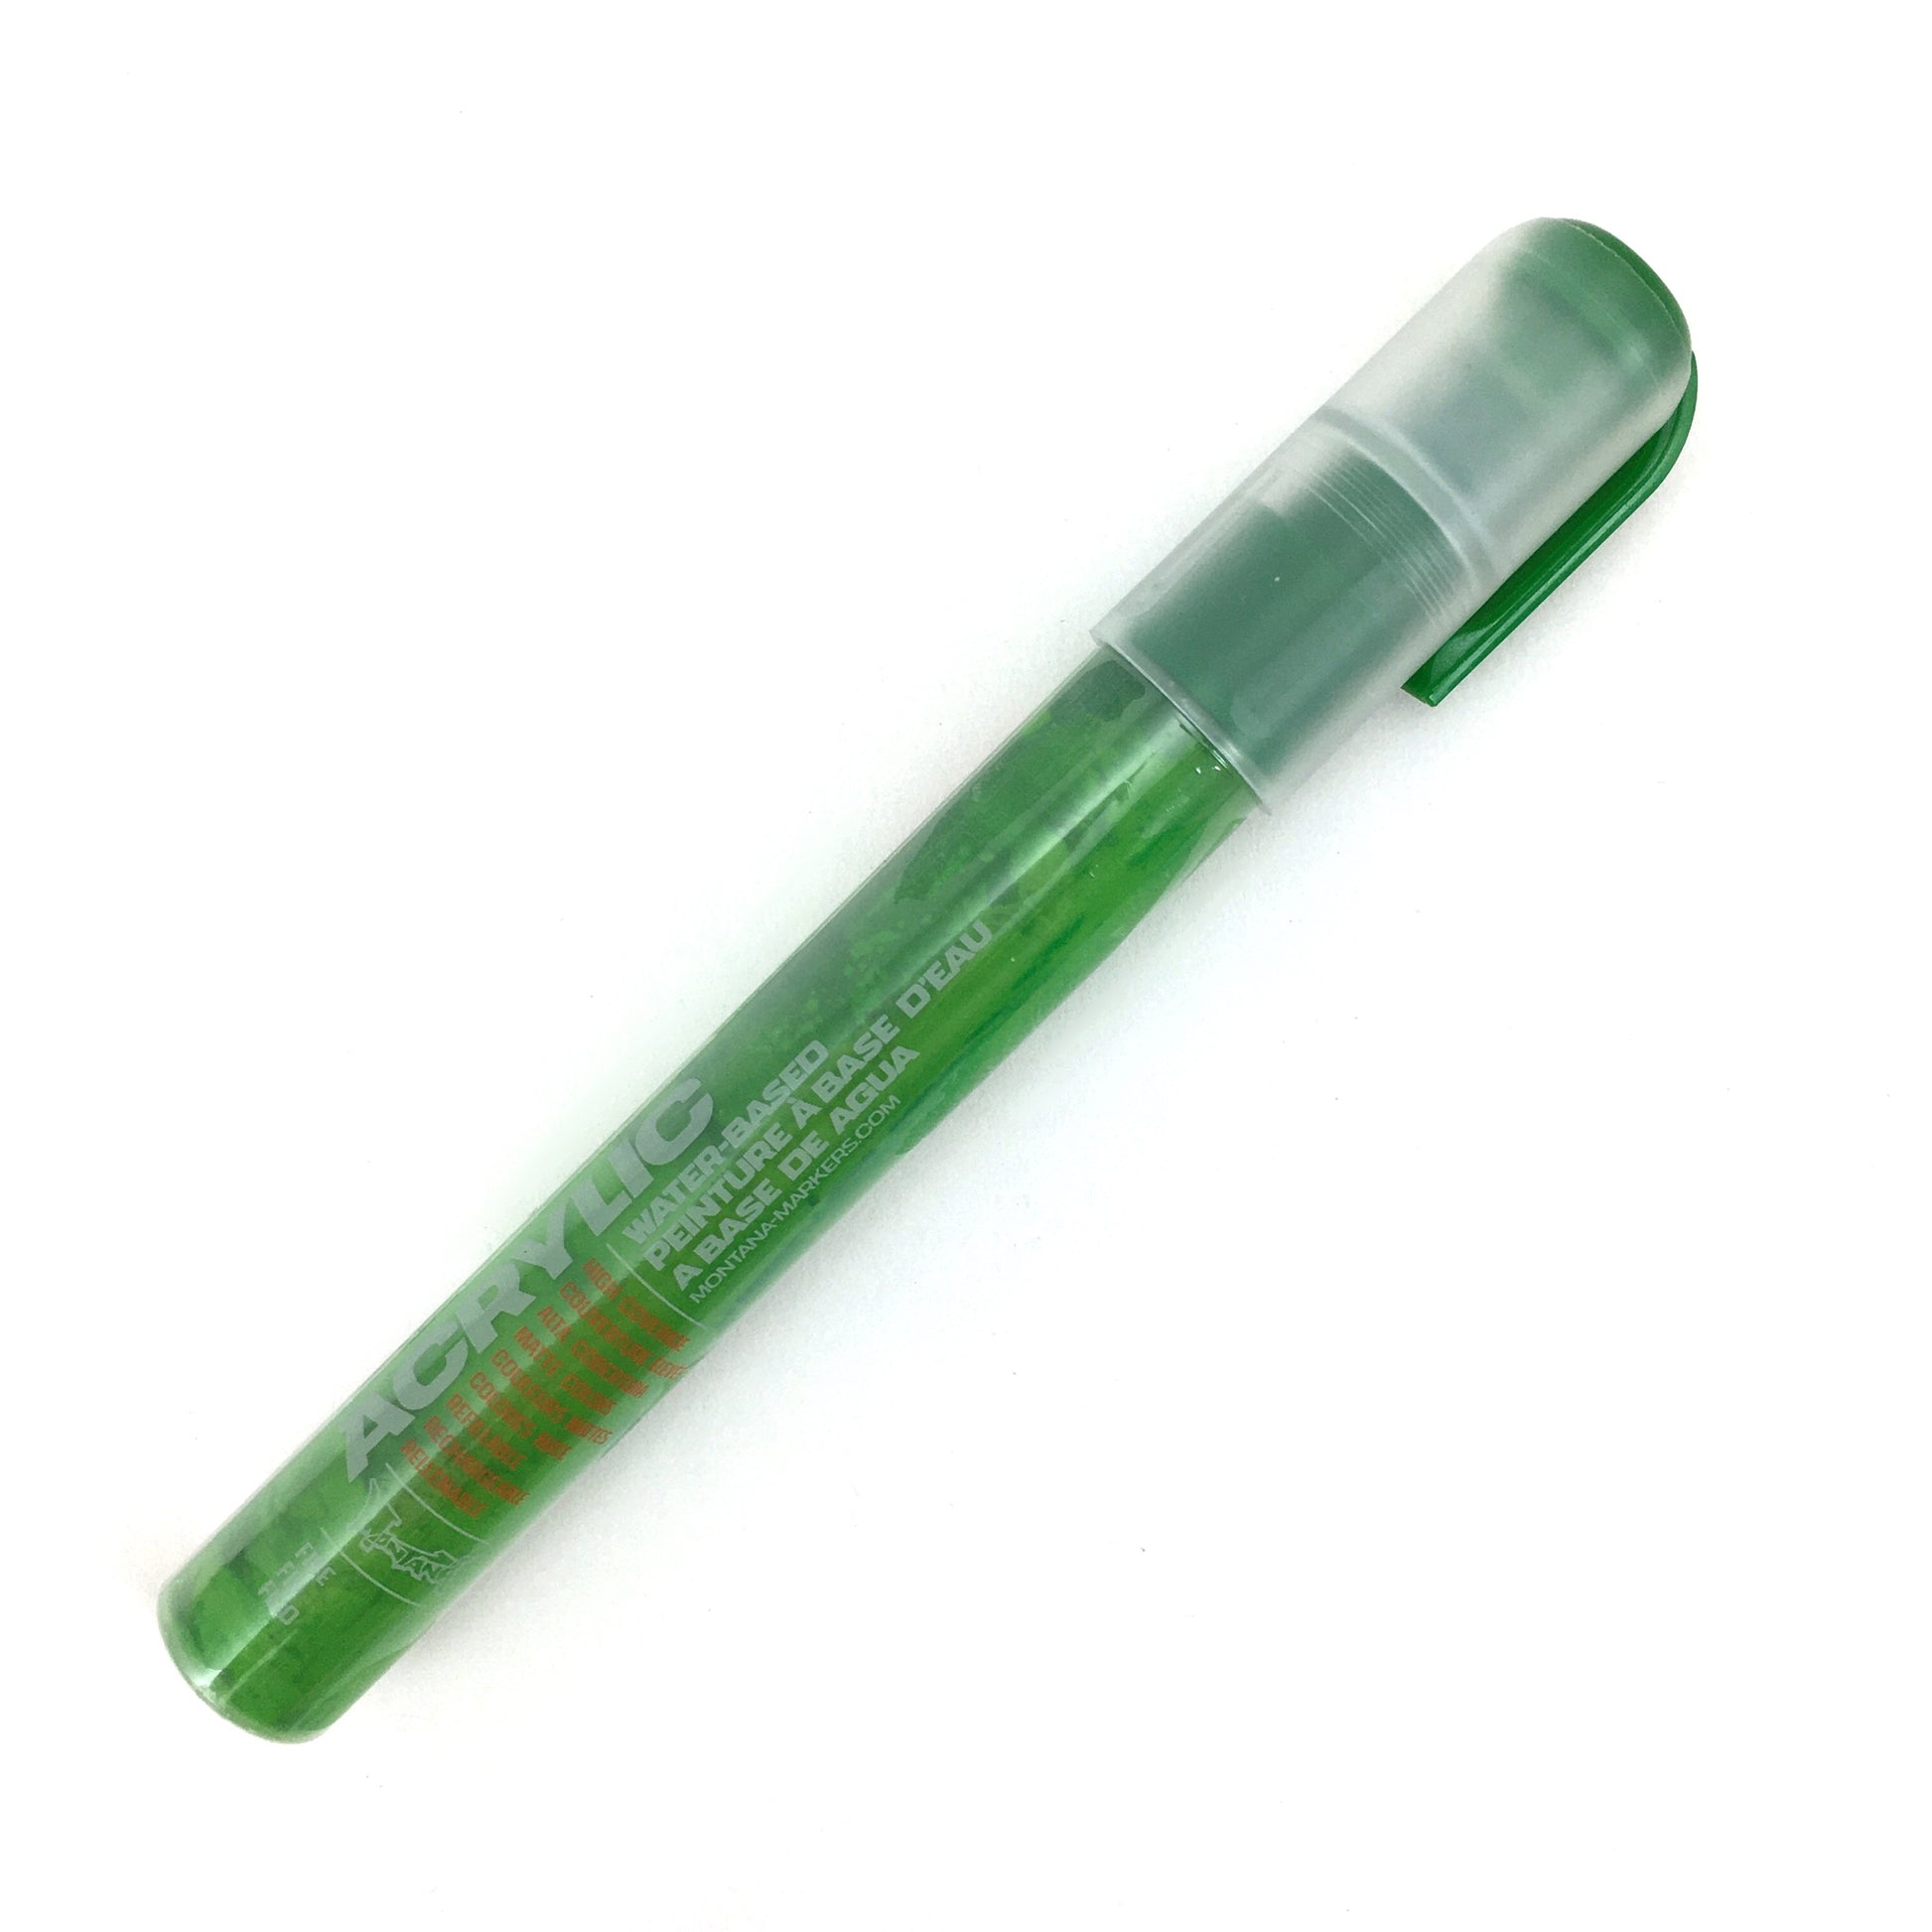 Montana Acrylic Paint Markers - Individuals - Shock Green / 2 mm by Montana - K. A. Artist Shop